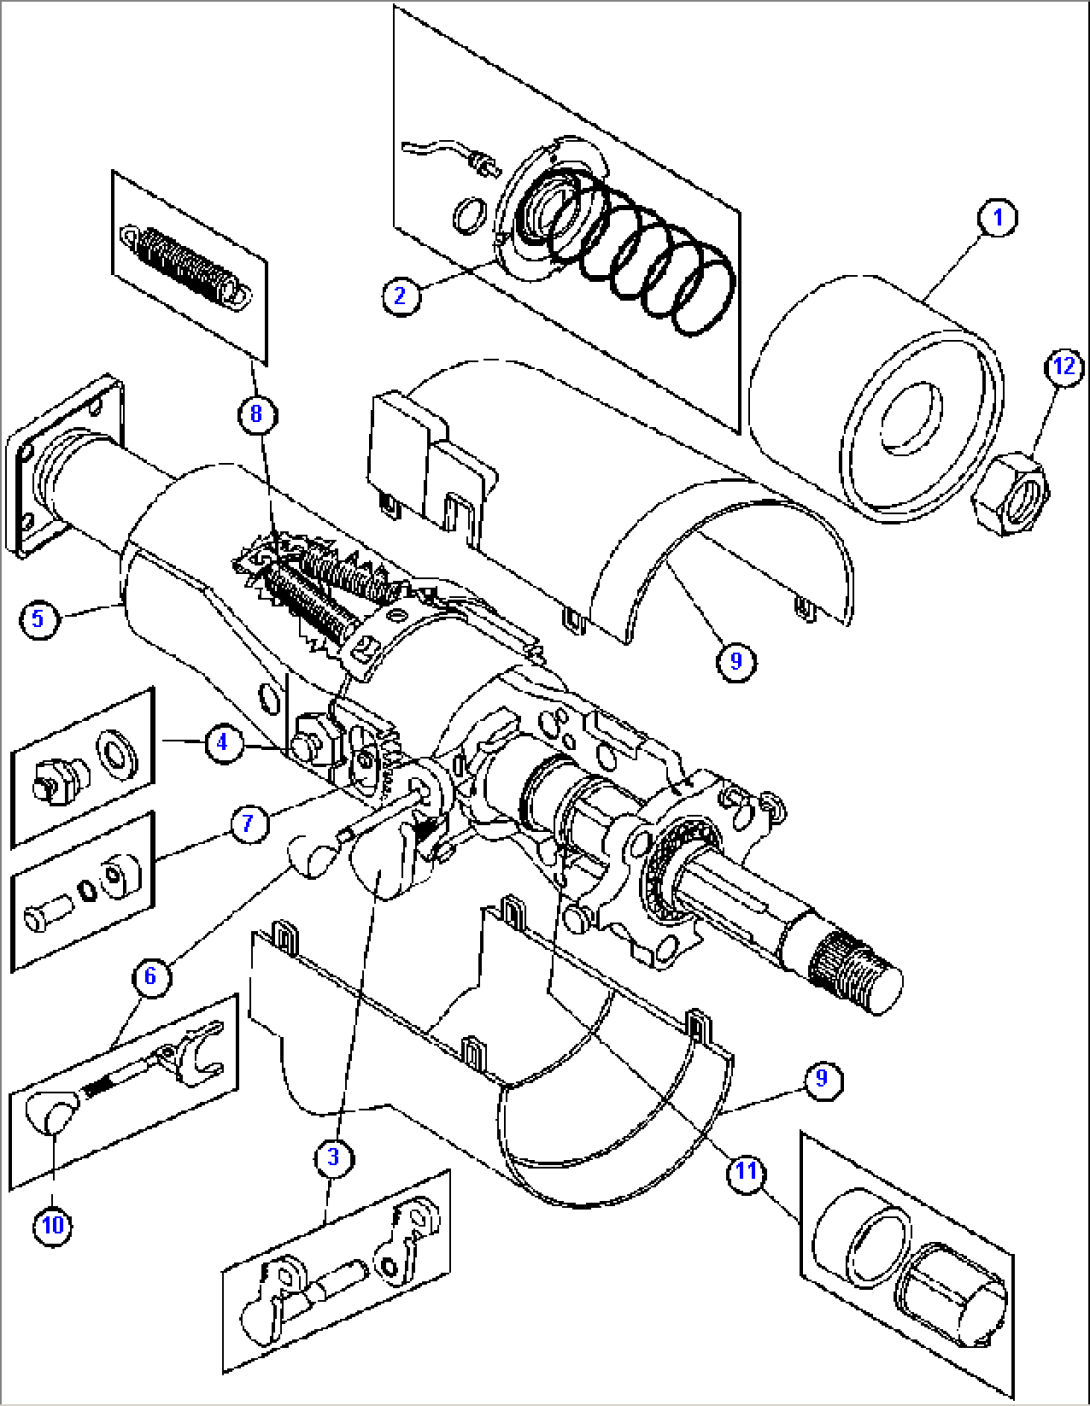 STEERING COLUMN ASSEMBLY (PC1447)